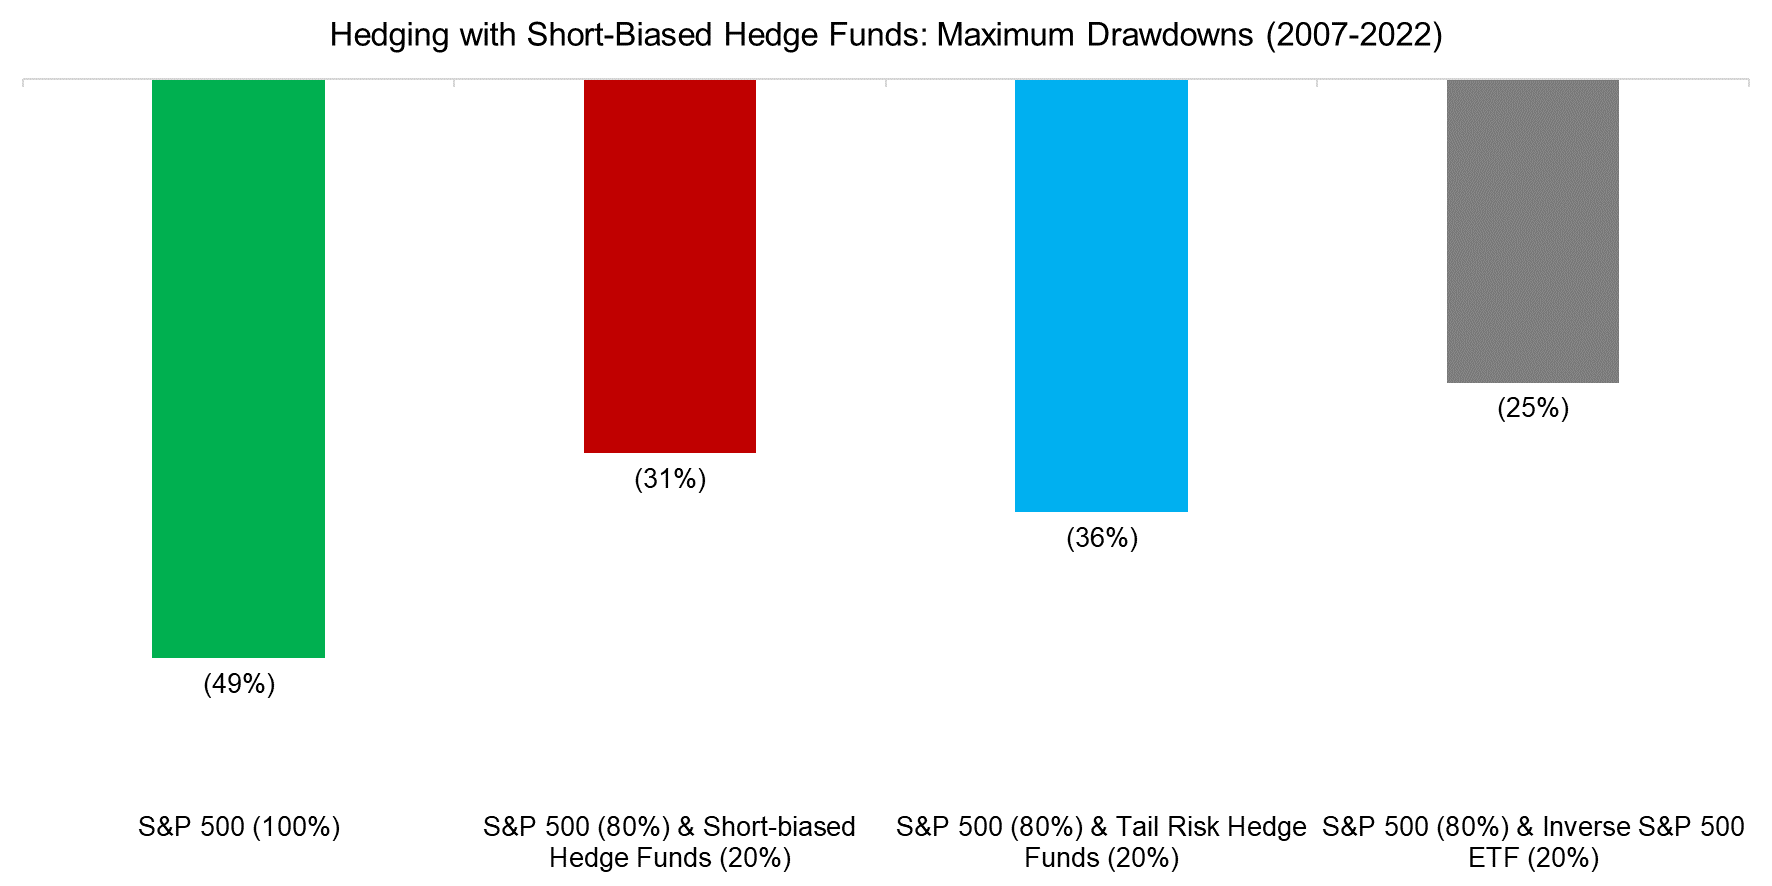 Hedging with Short-Biased Hedge Funds Maximum Drawdowns (2007-2022)